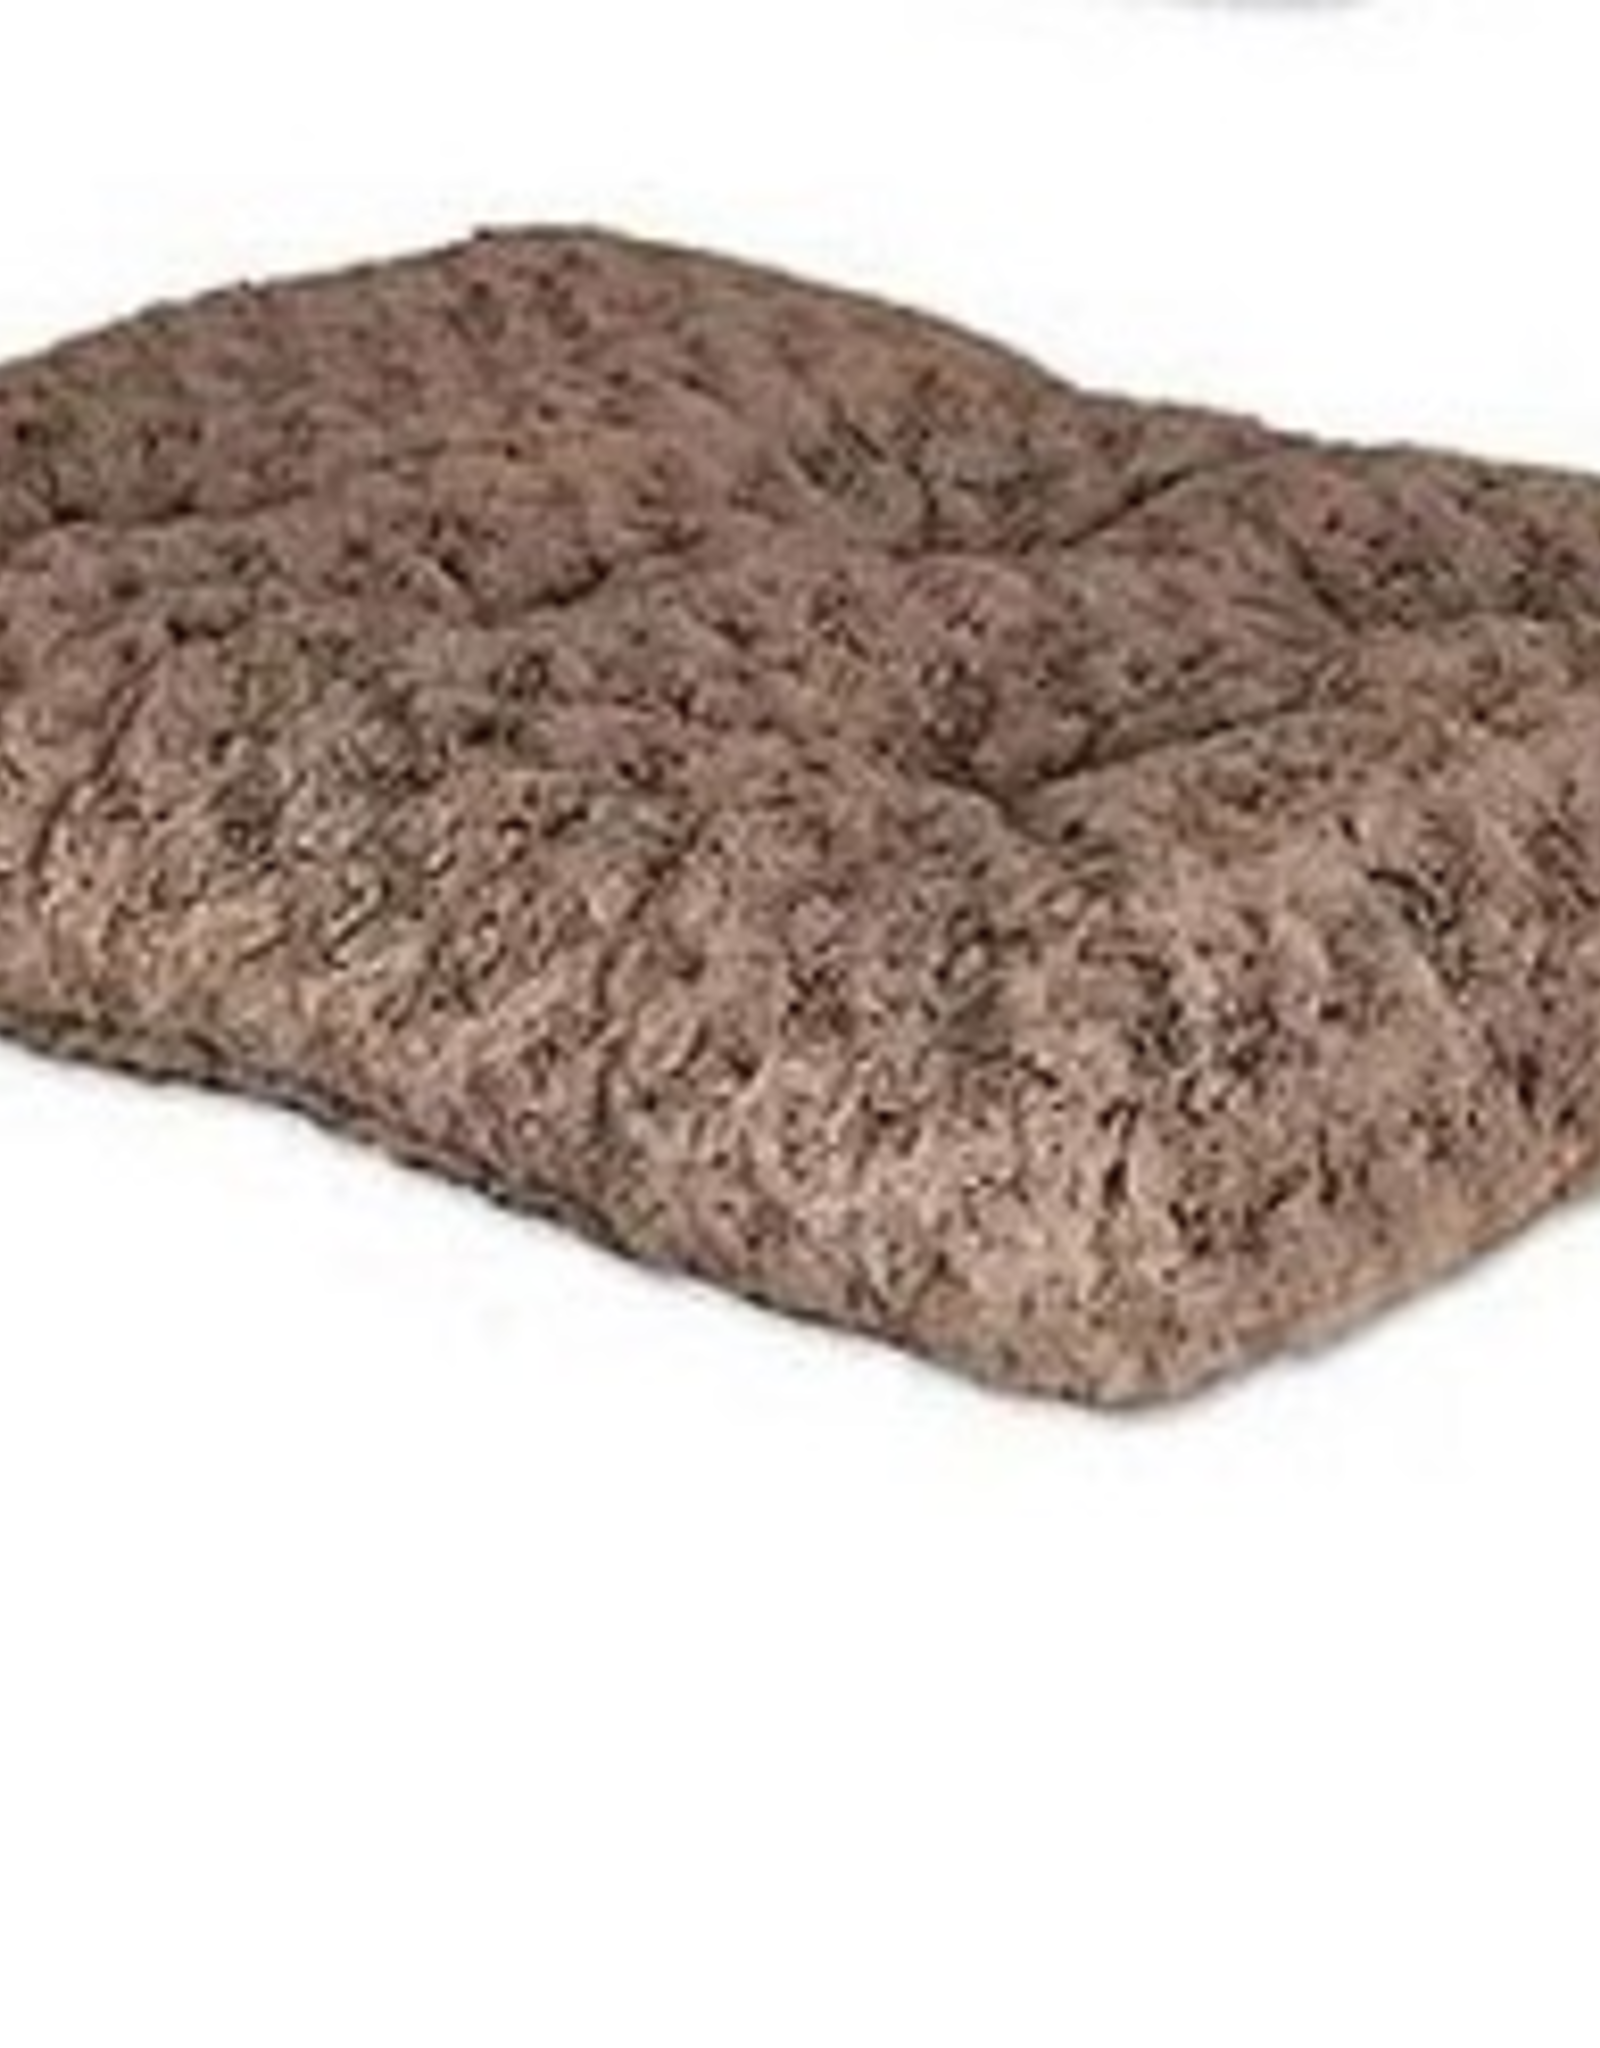 MIDWEST PET PRODUCTS BED QUIET TIME OMBRE SWIRL 23X18 MOCHA